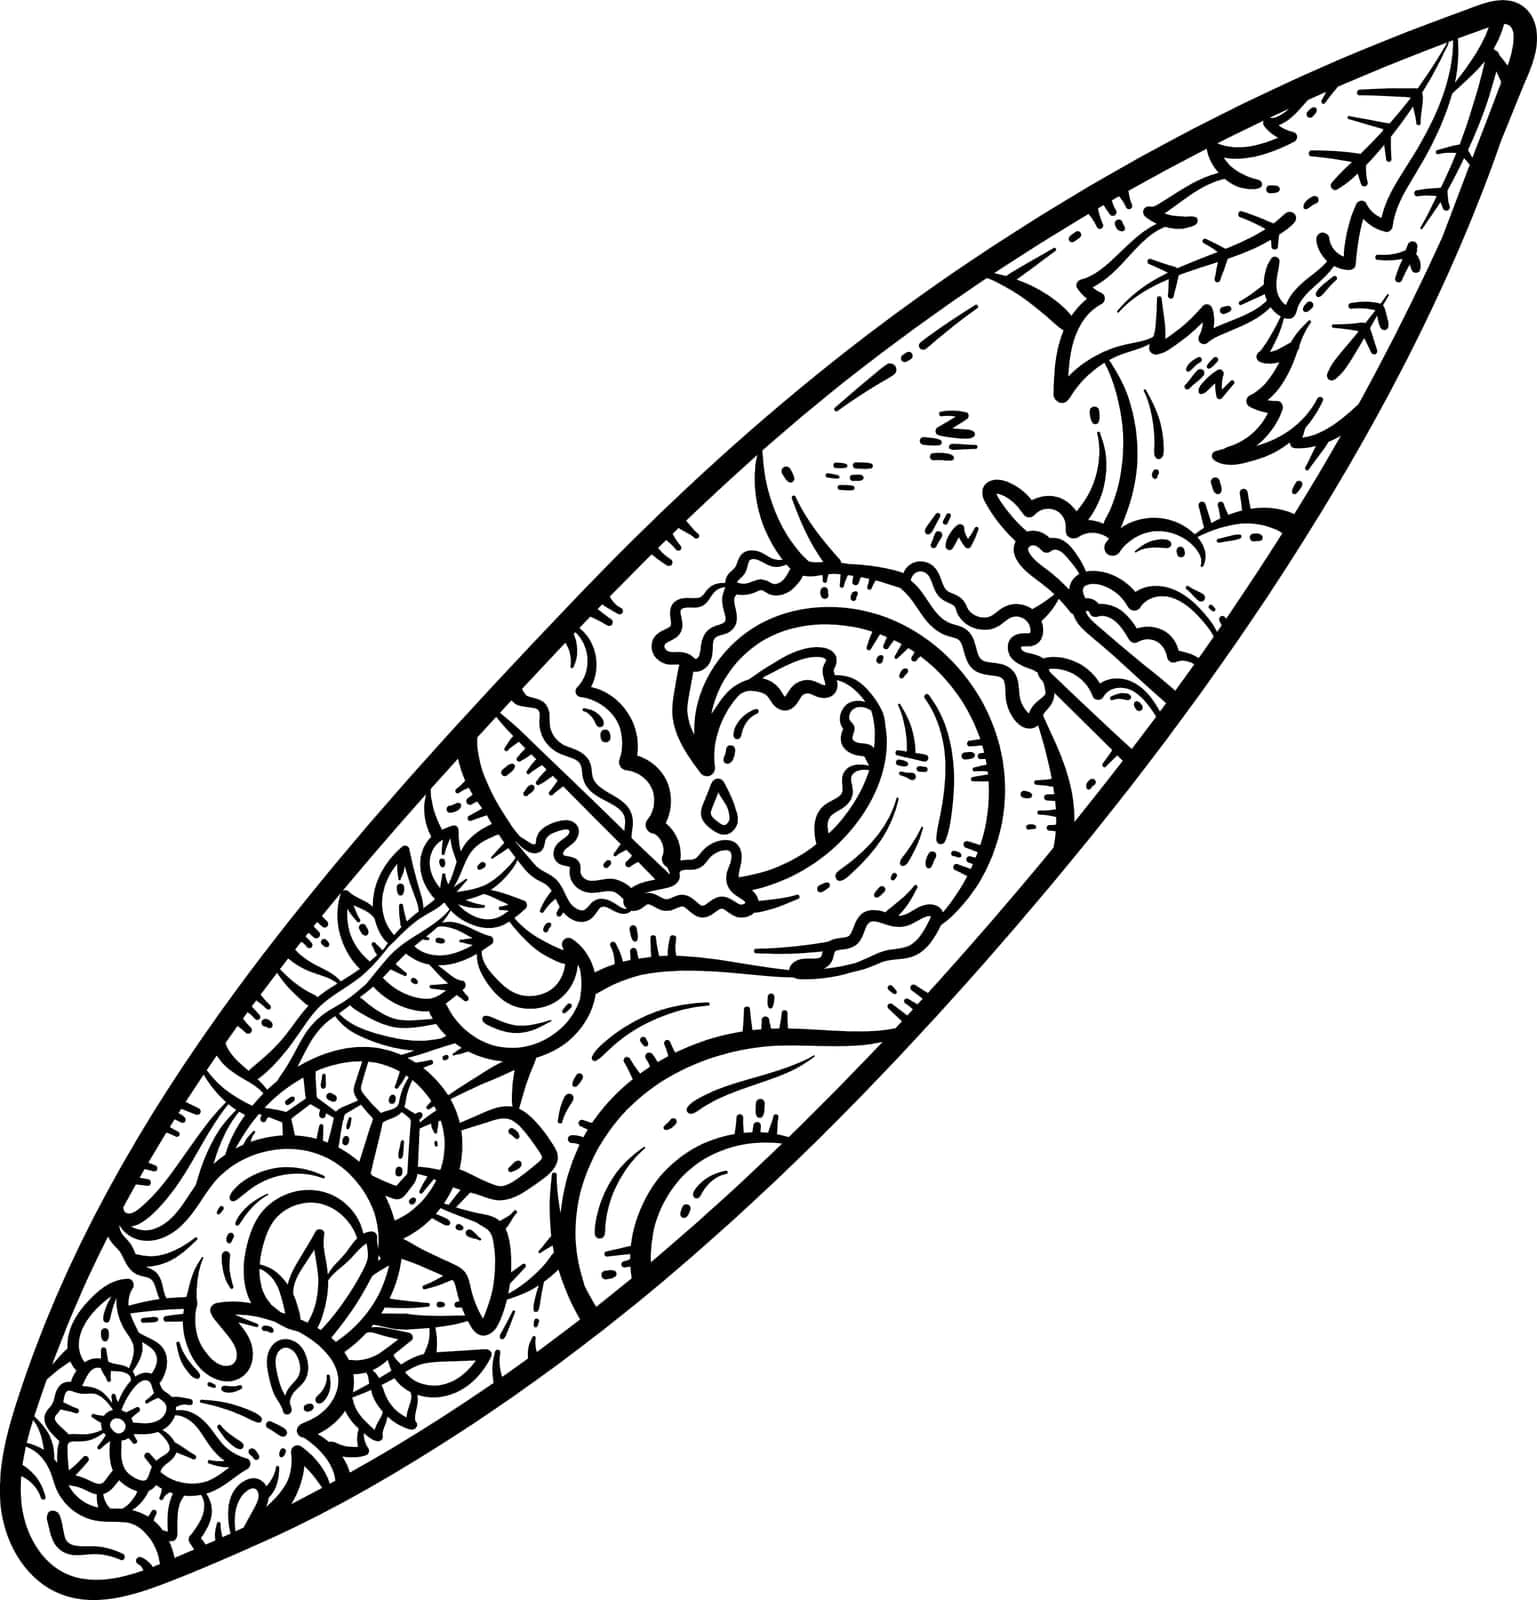 Summer Surfing Board Line Art Coloring Page by abbydesign